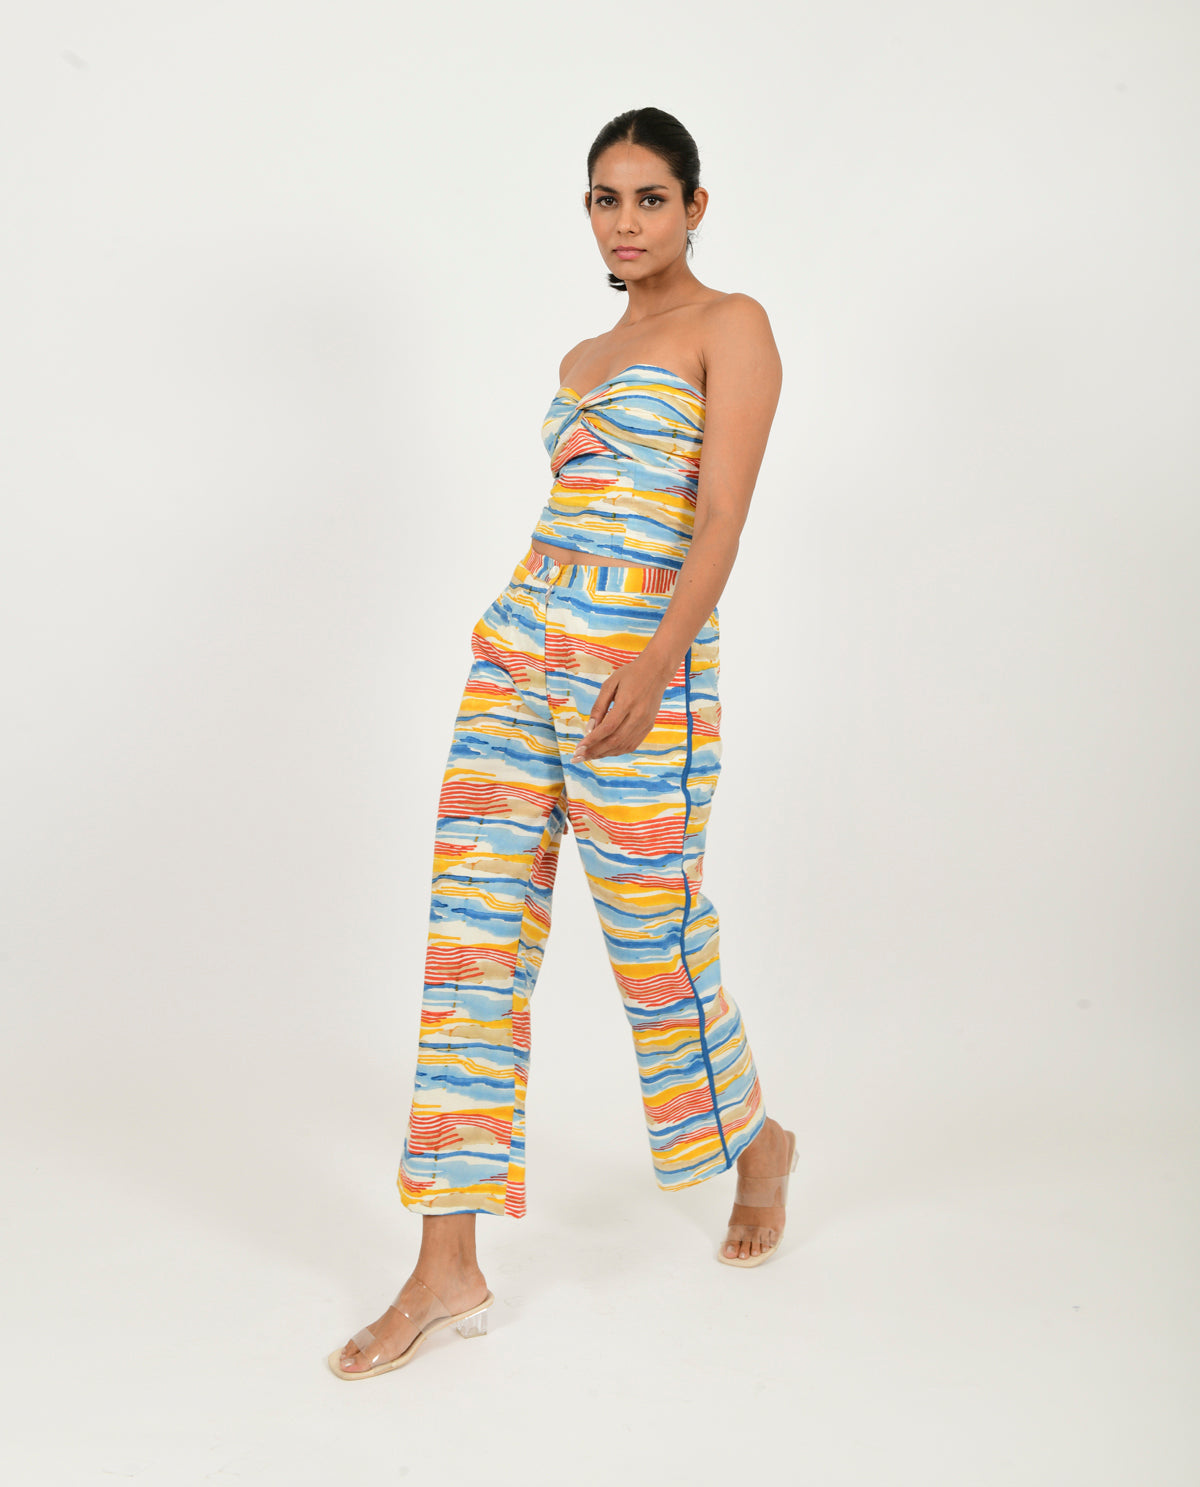 Multicolor Tube Top/Pant Co-ord Set at Kamakhyaa by Rias Jaipur. This item is 100% Organic Cotton, Block Prints, Casual Wear, Co-ord Sets, Multicolor, Natural, Scribble Prints, Slim Fit, Vacation Co-ords, Womenswear, Yaadein